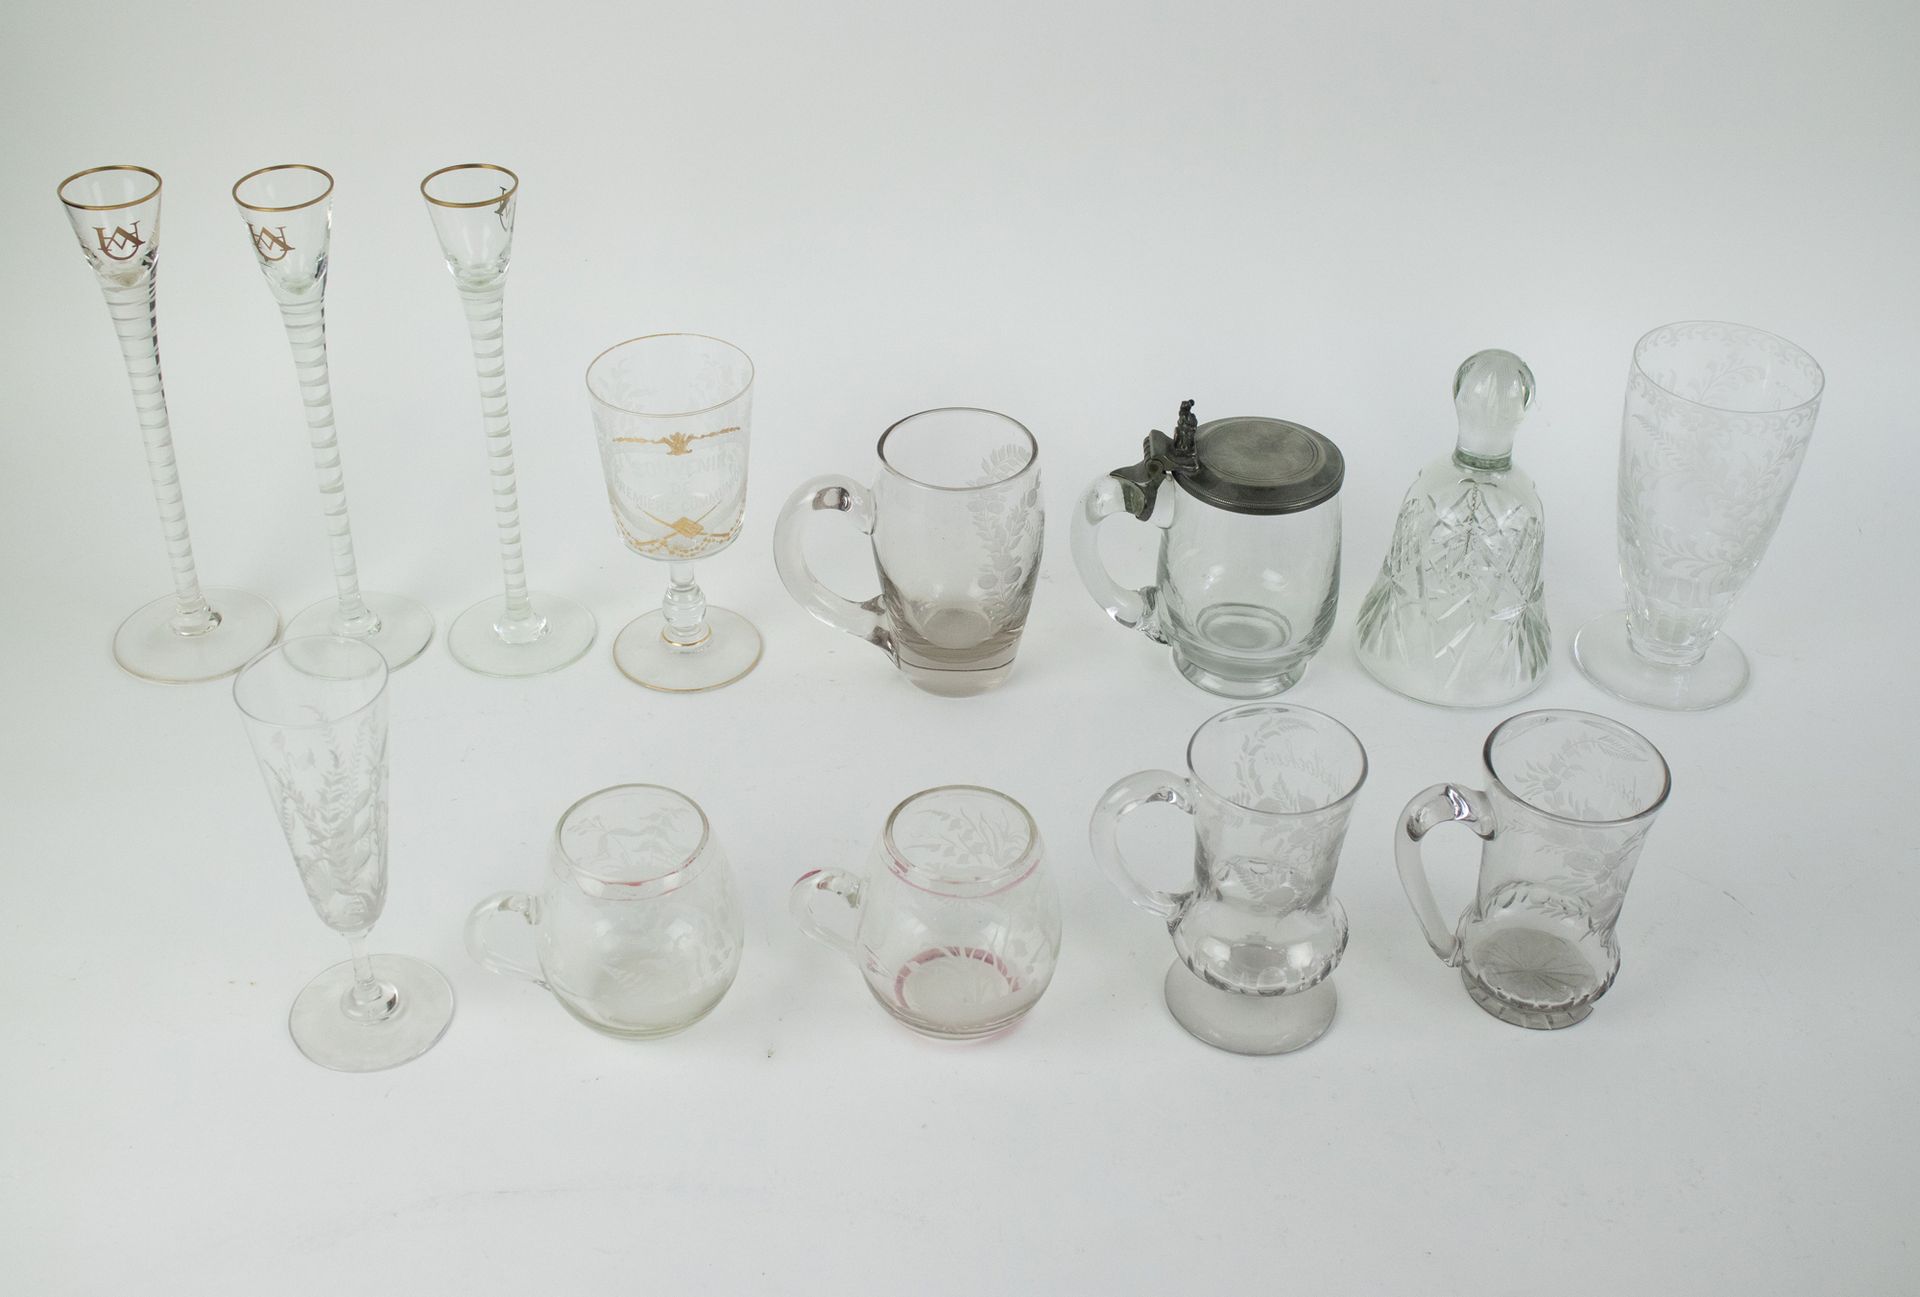 Null A collection of old glassware
A collection of old glassware and a table clo&hellip;